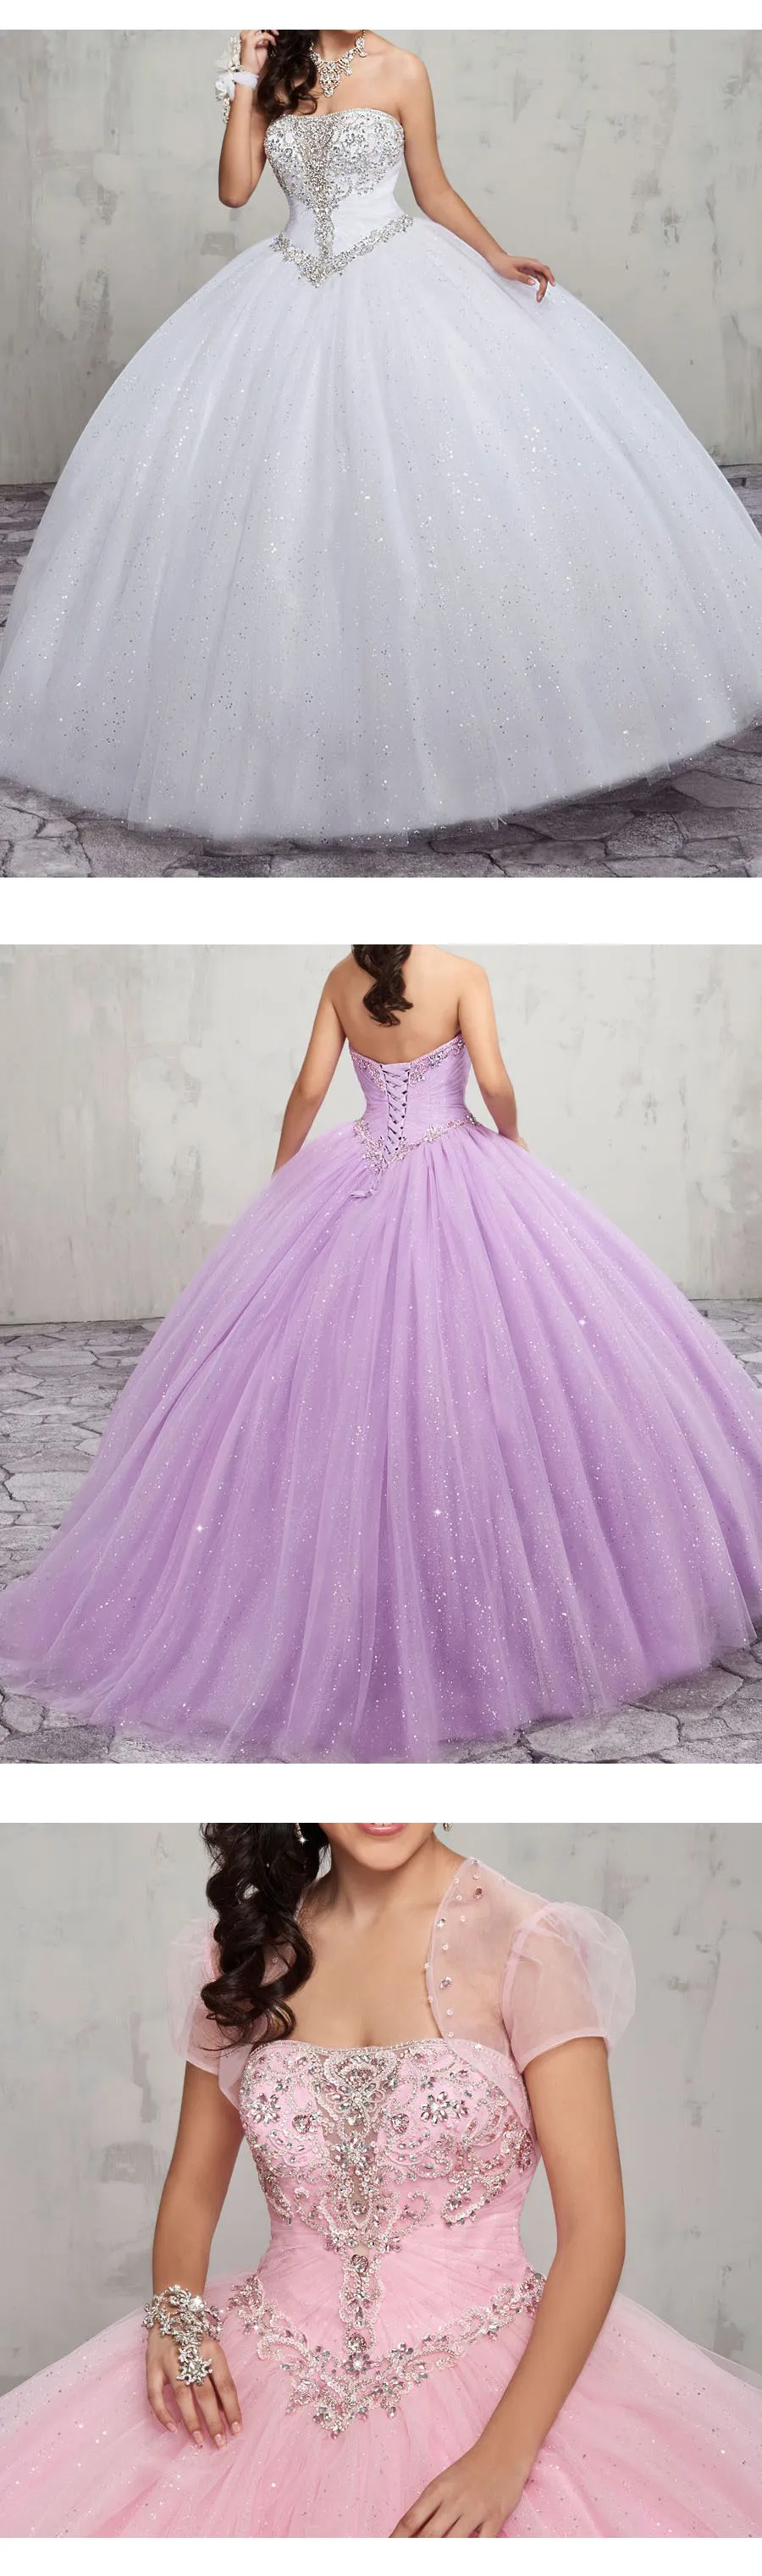 Fiesta Quinceanera 56445 VIP Fashion Prom & Quince Dress Superstore